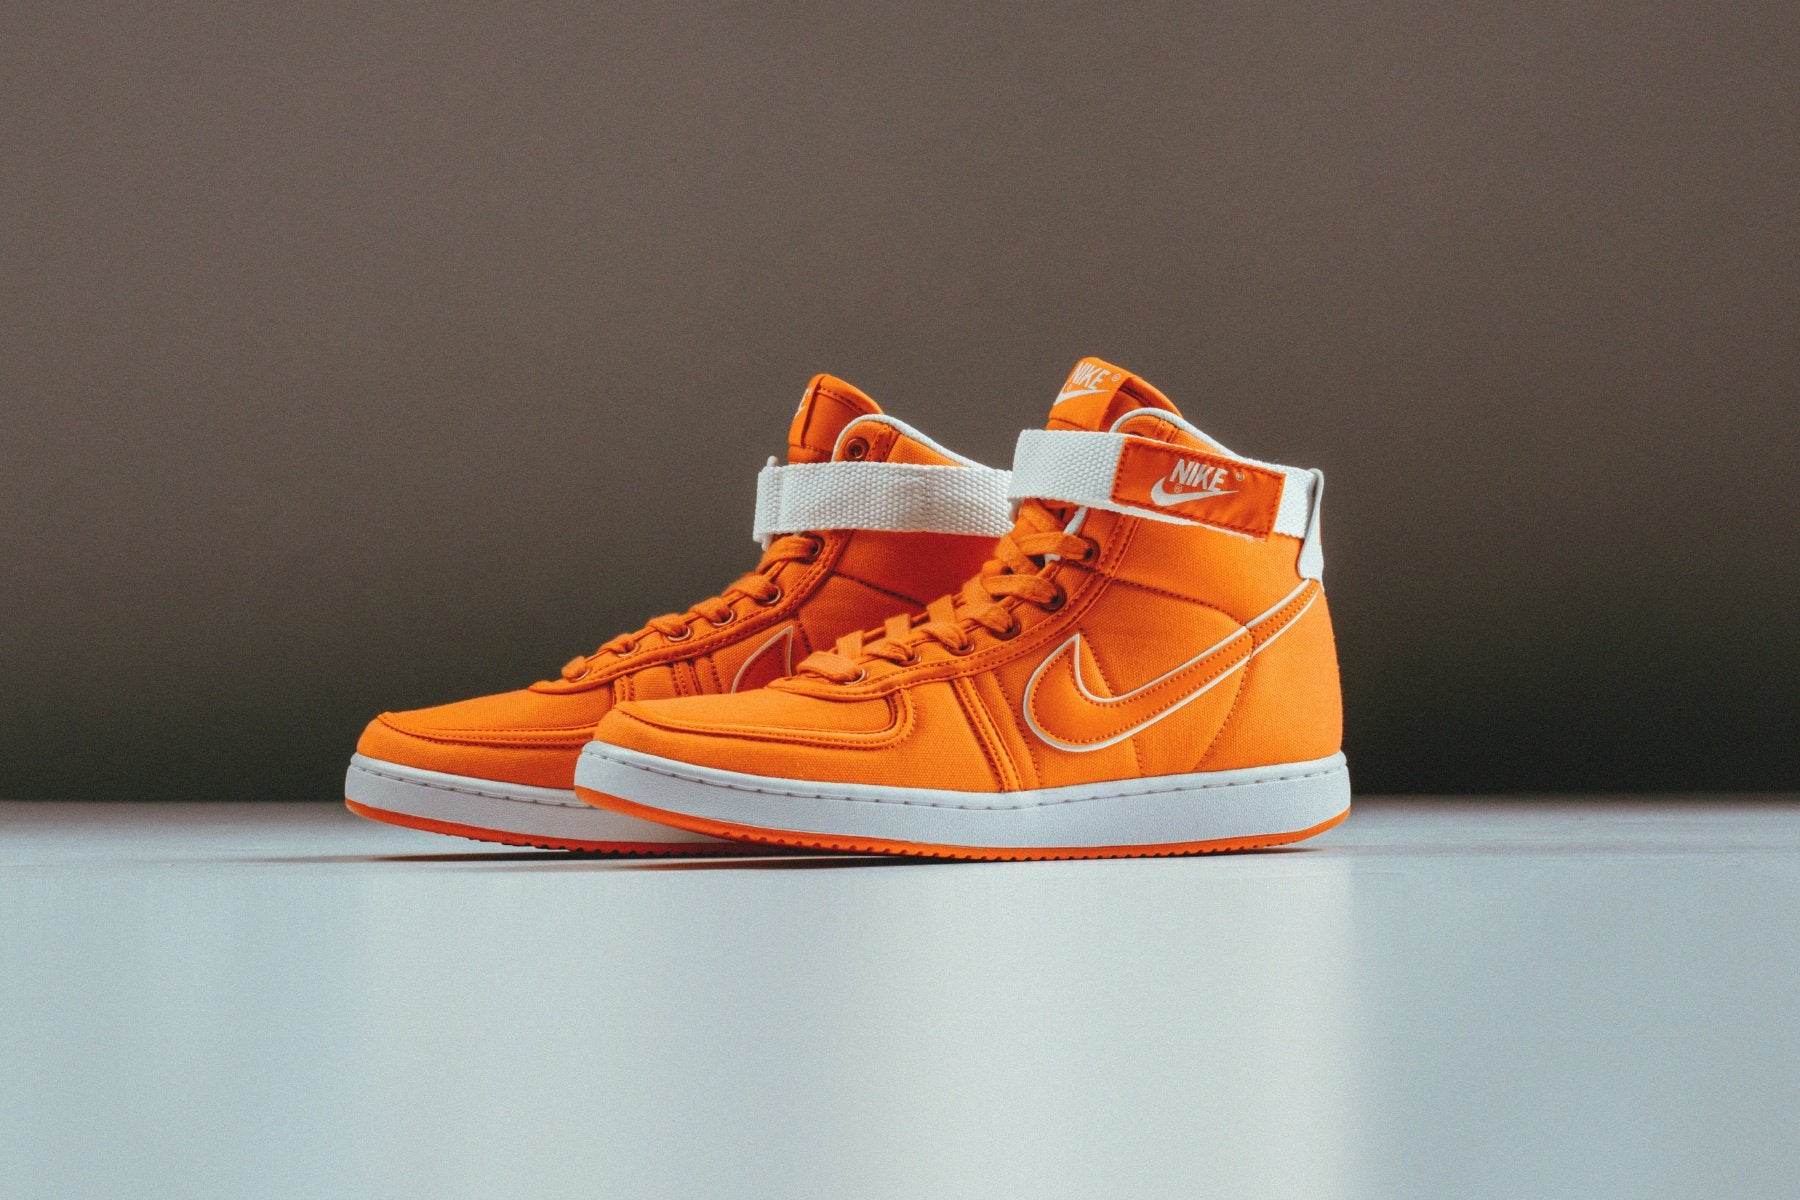 Nike Vandal High Supreme QS 'Doc Brown' Available Now Feature